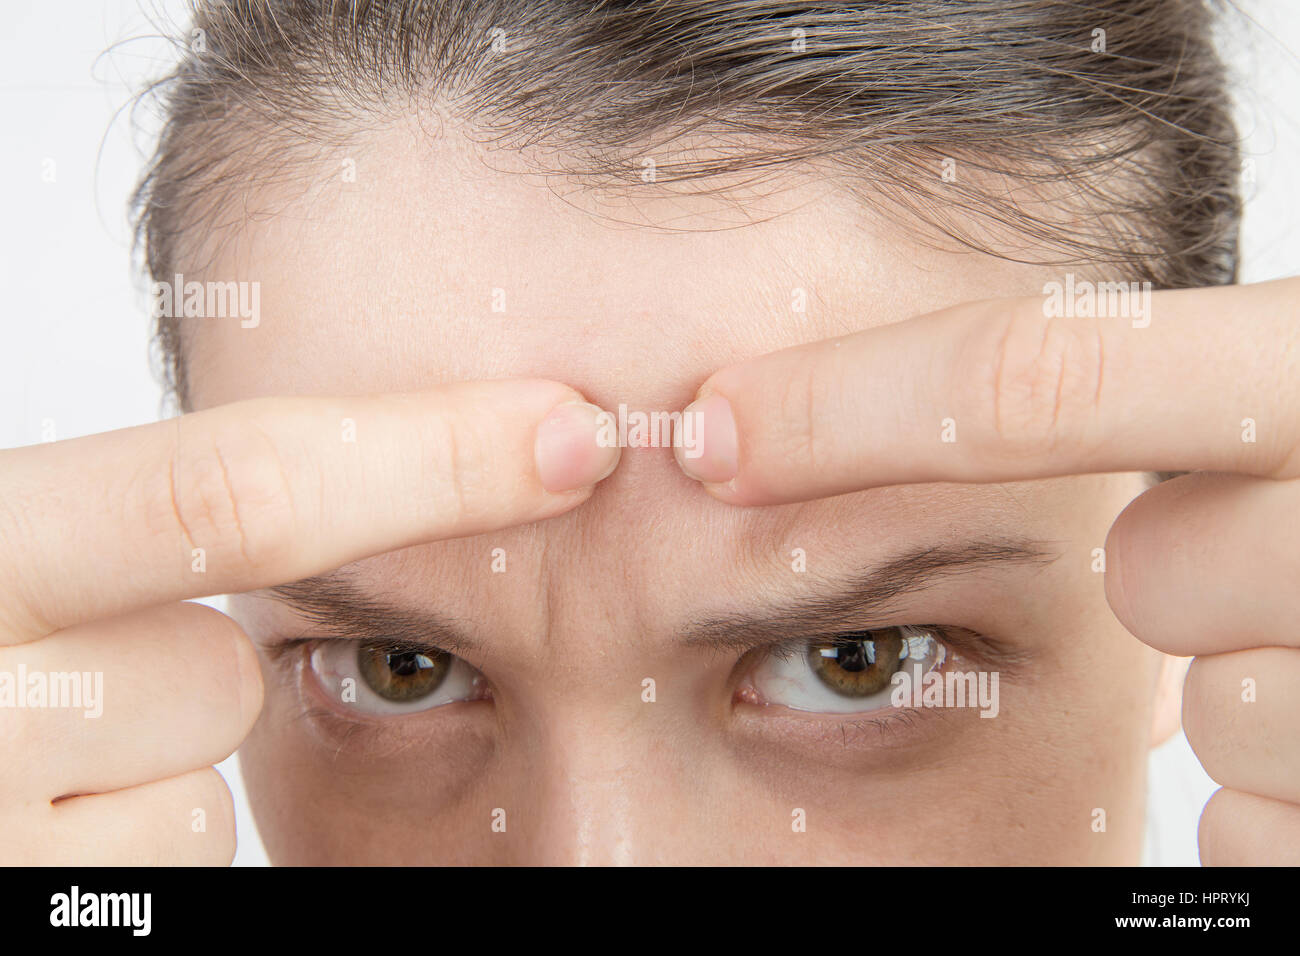 Young girl with problem skin  acne on the face close up Stock Photo